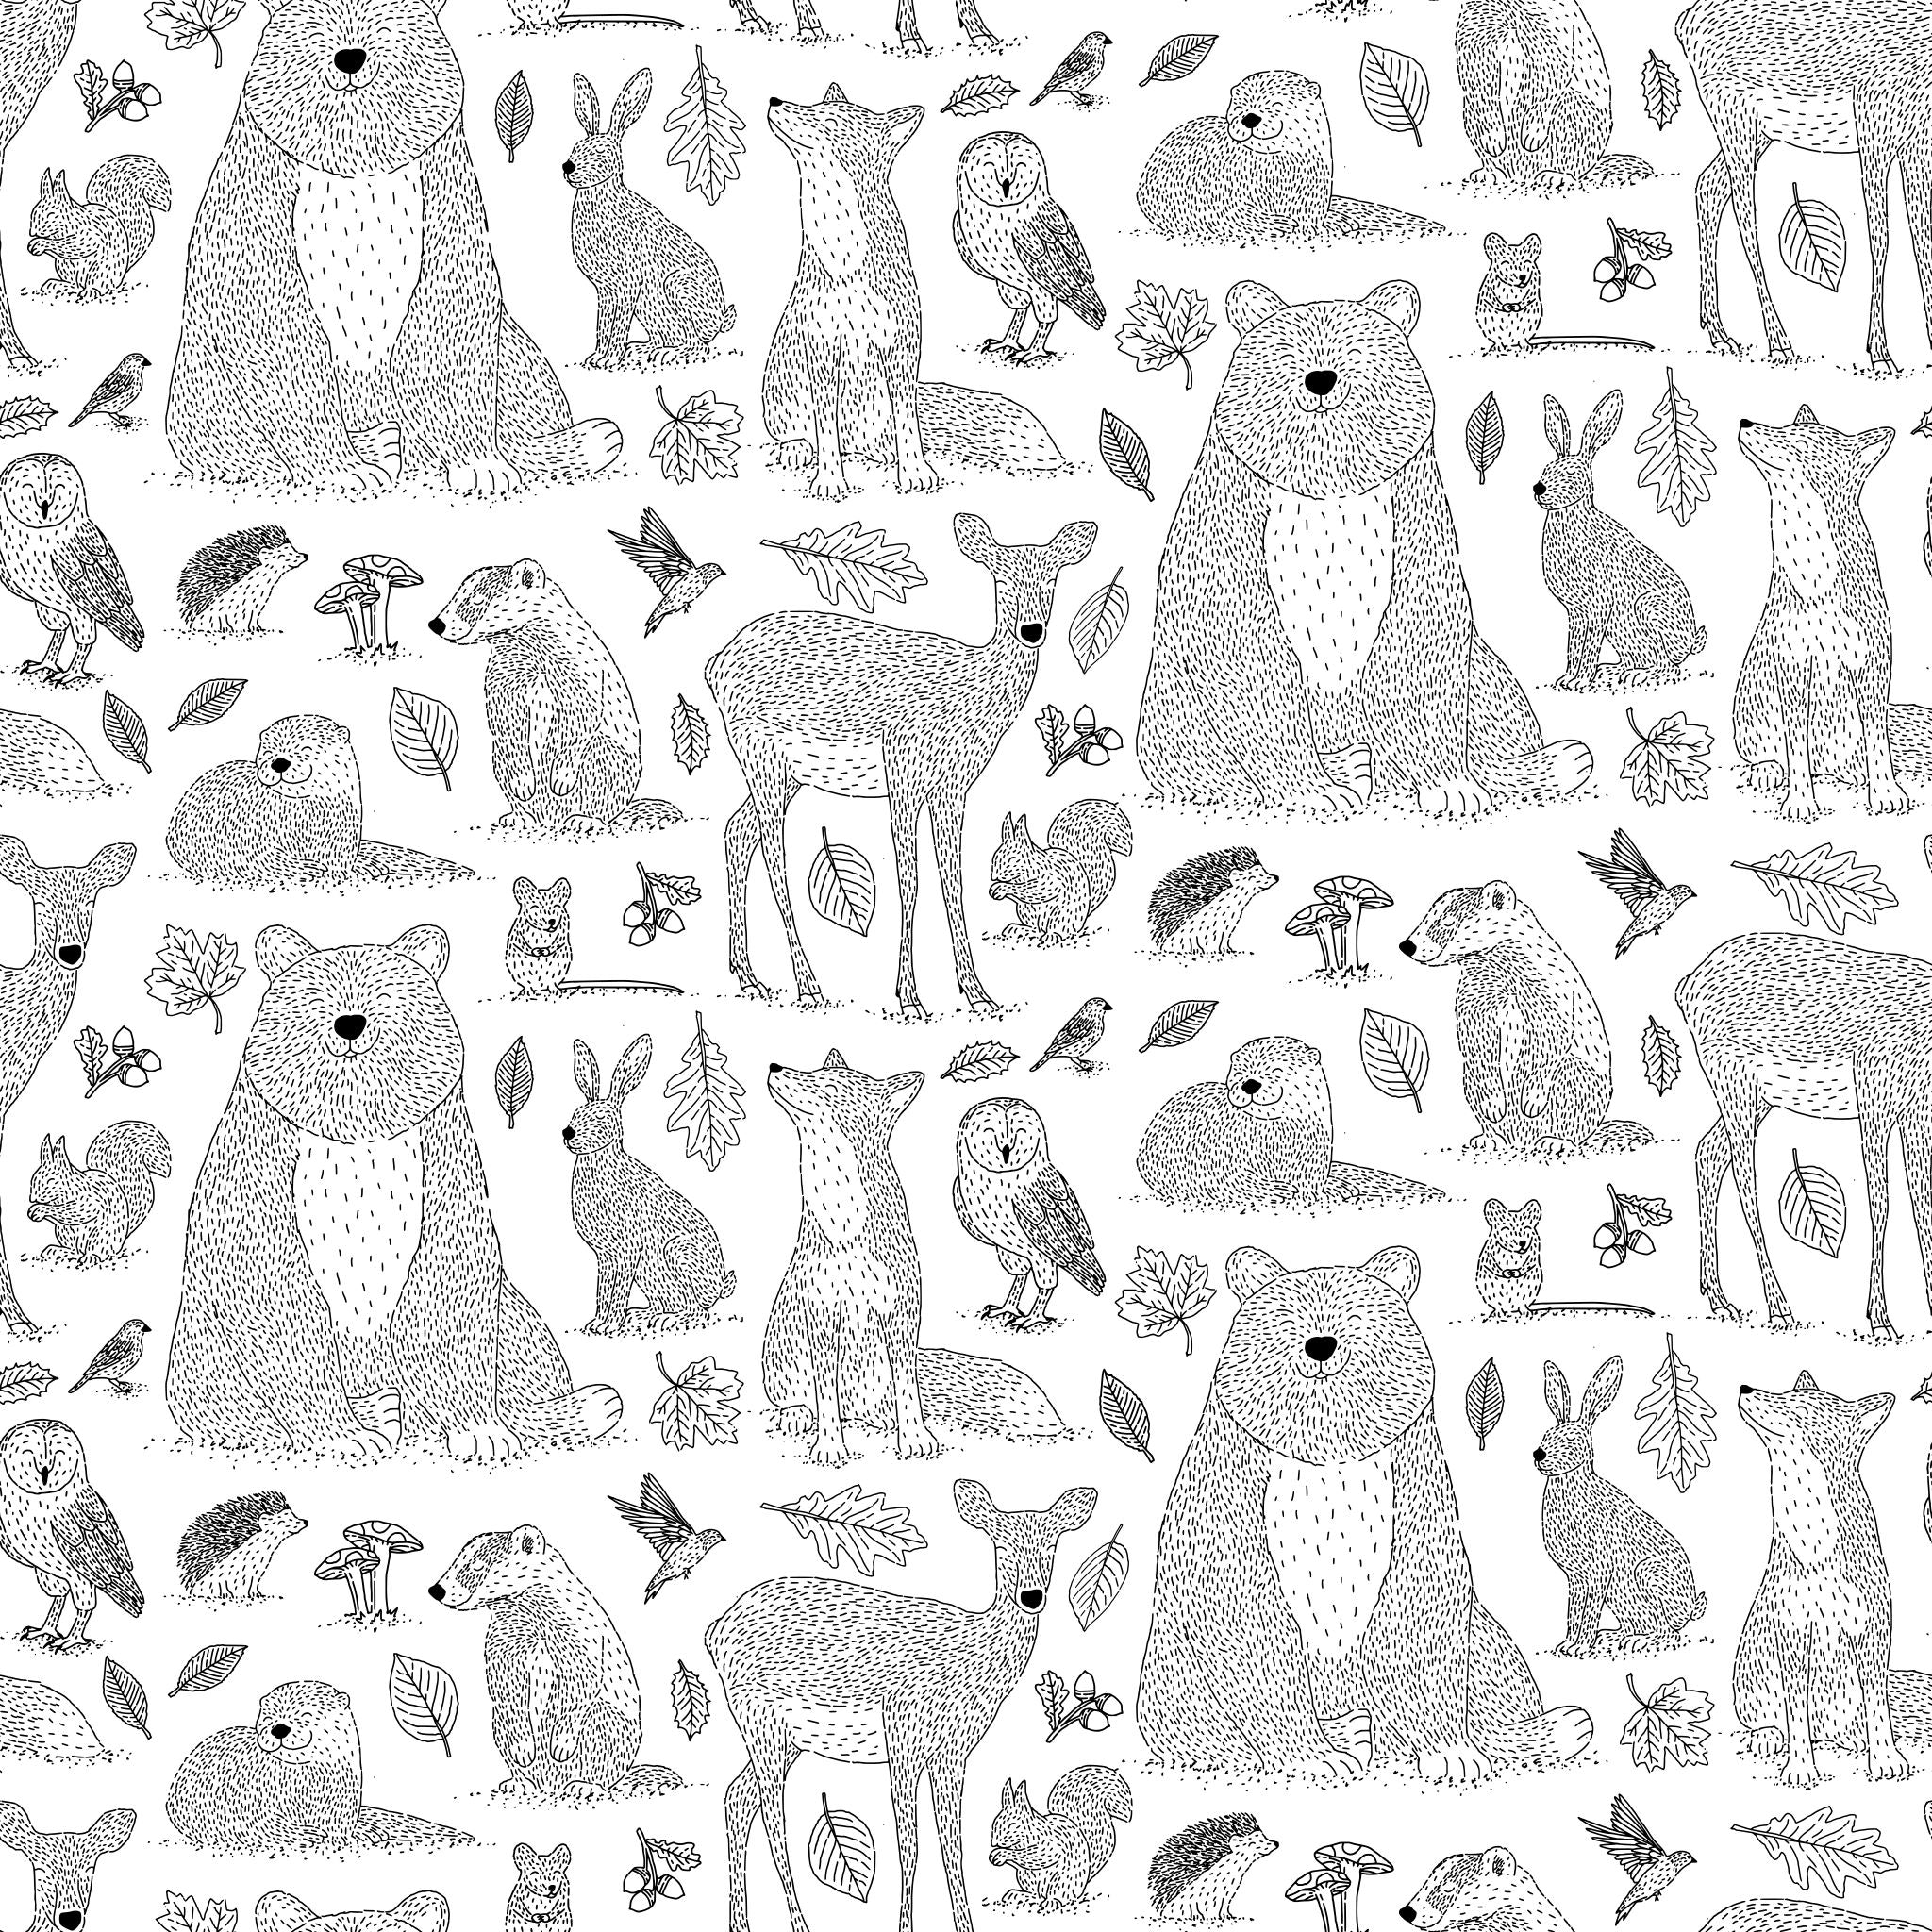 "Woodland Wallpaper by Wall Blush in a stylish room, featuring whimsical forest animals as the main design focus."